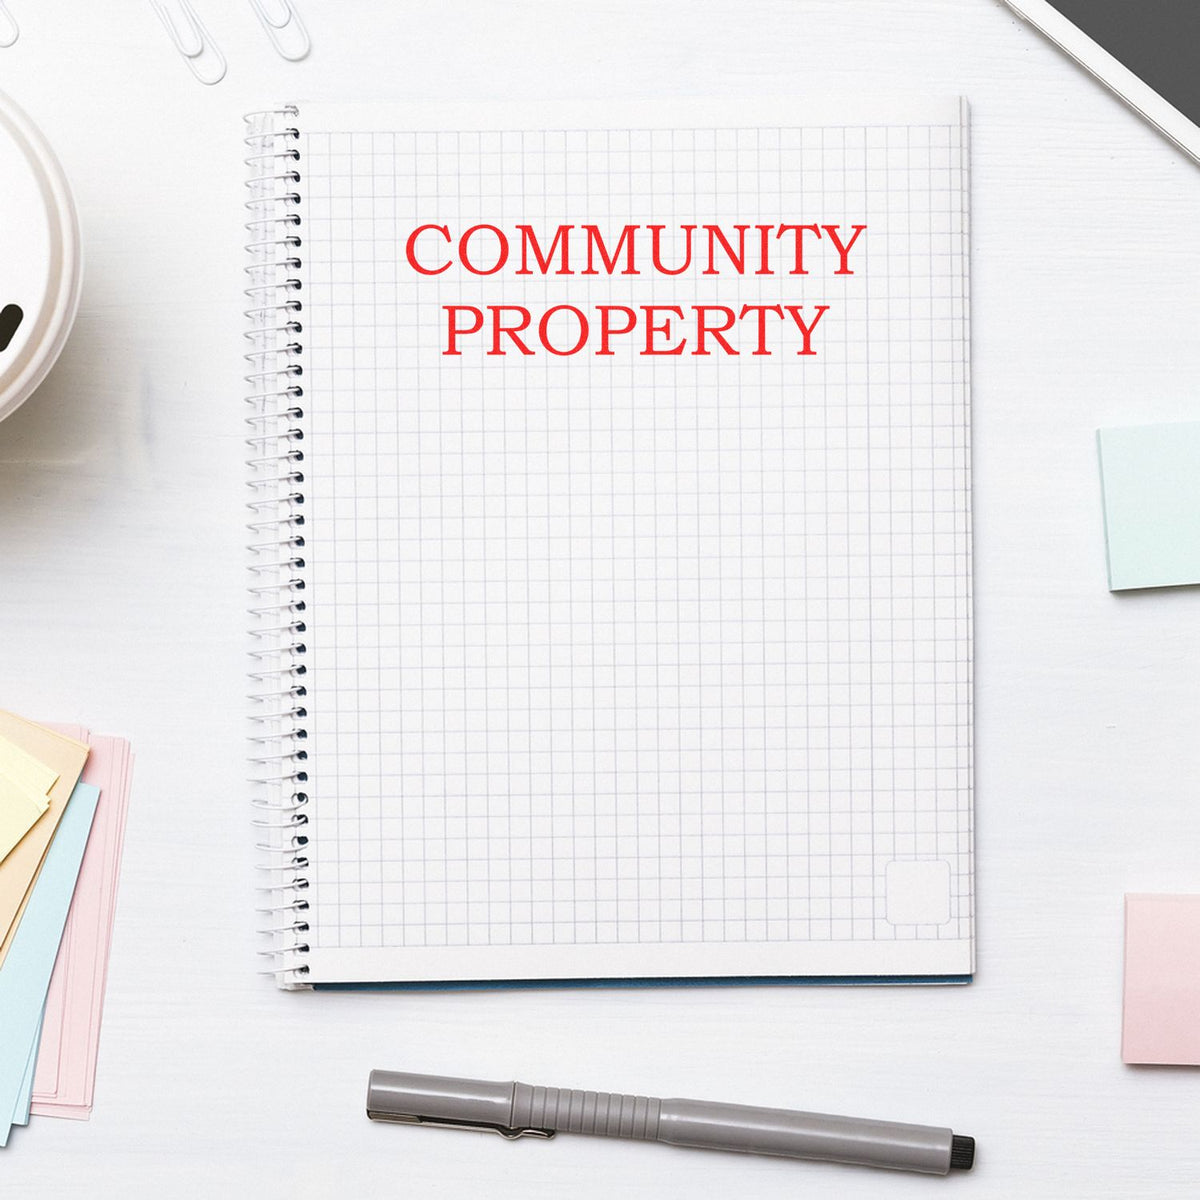 Large Self-Inking Community Property Stamp In Use Photo